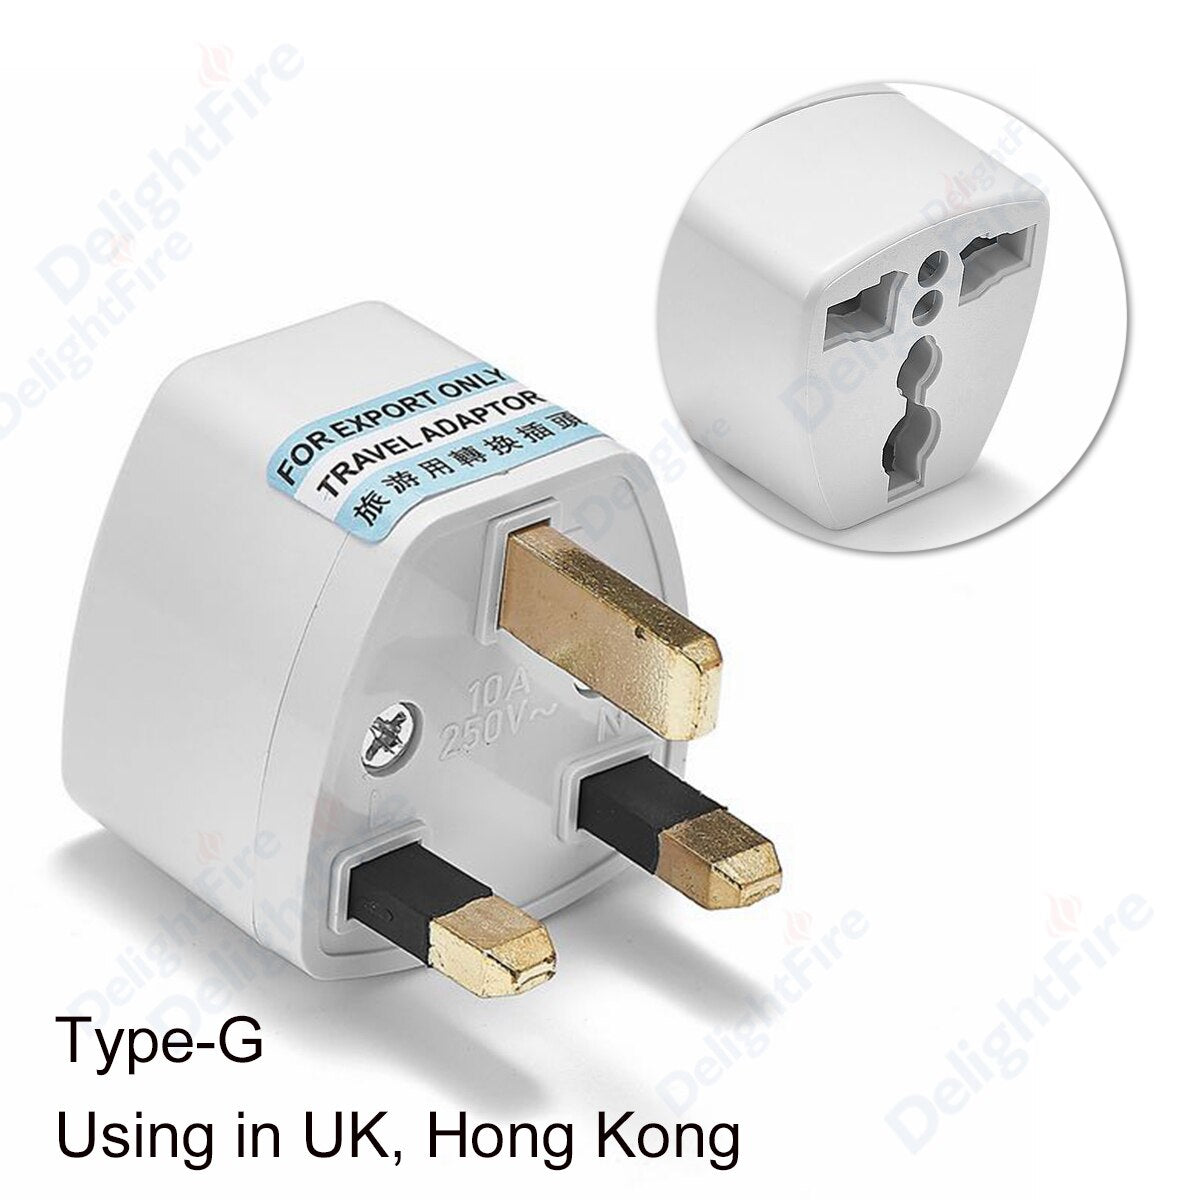 High-Quality Travel Plug Adapter | Lightweight and Easy-to-Use | Multiple Plug Types